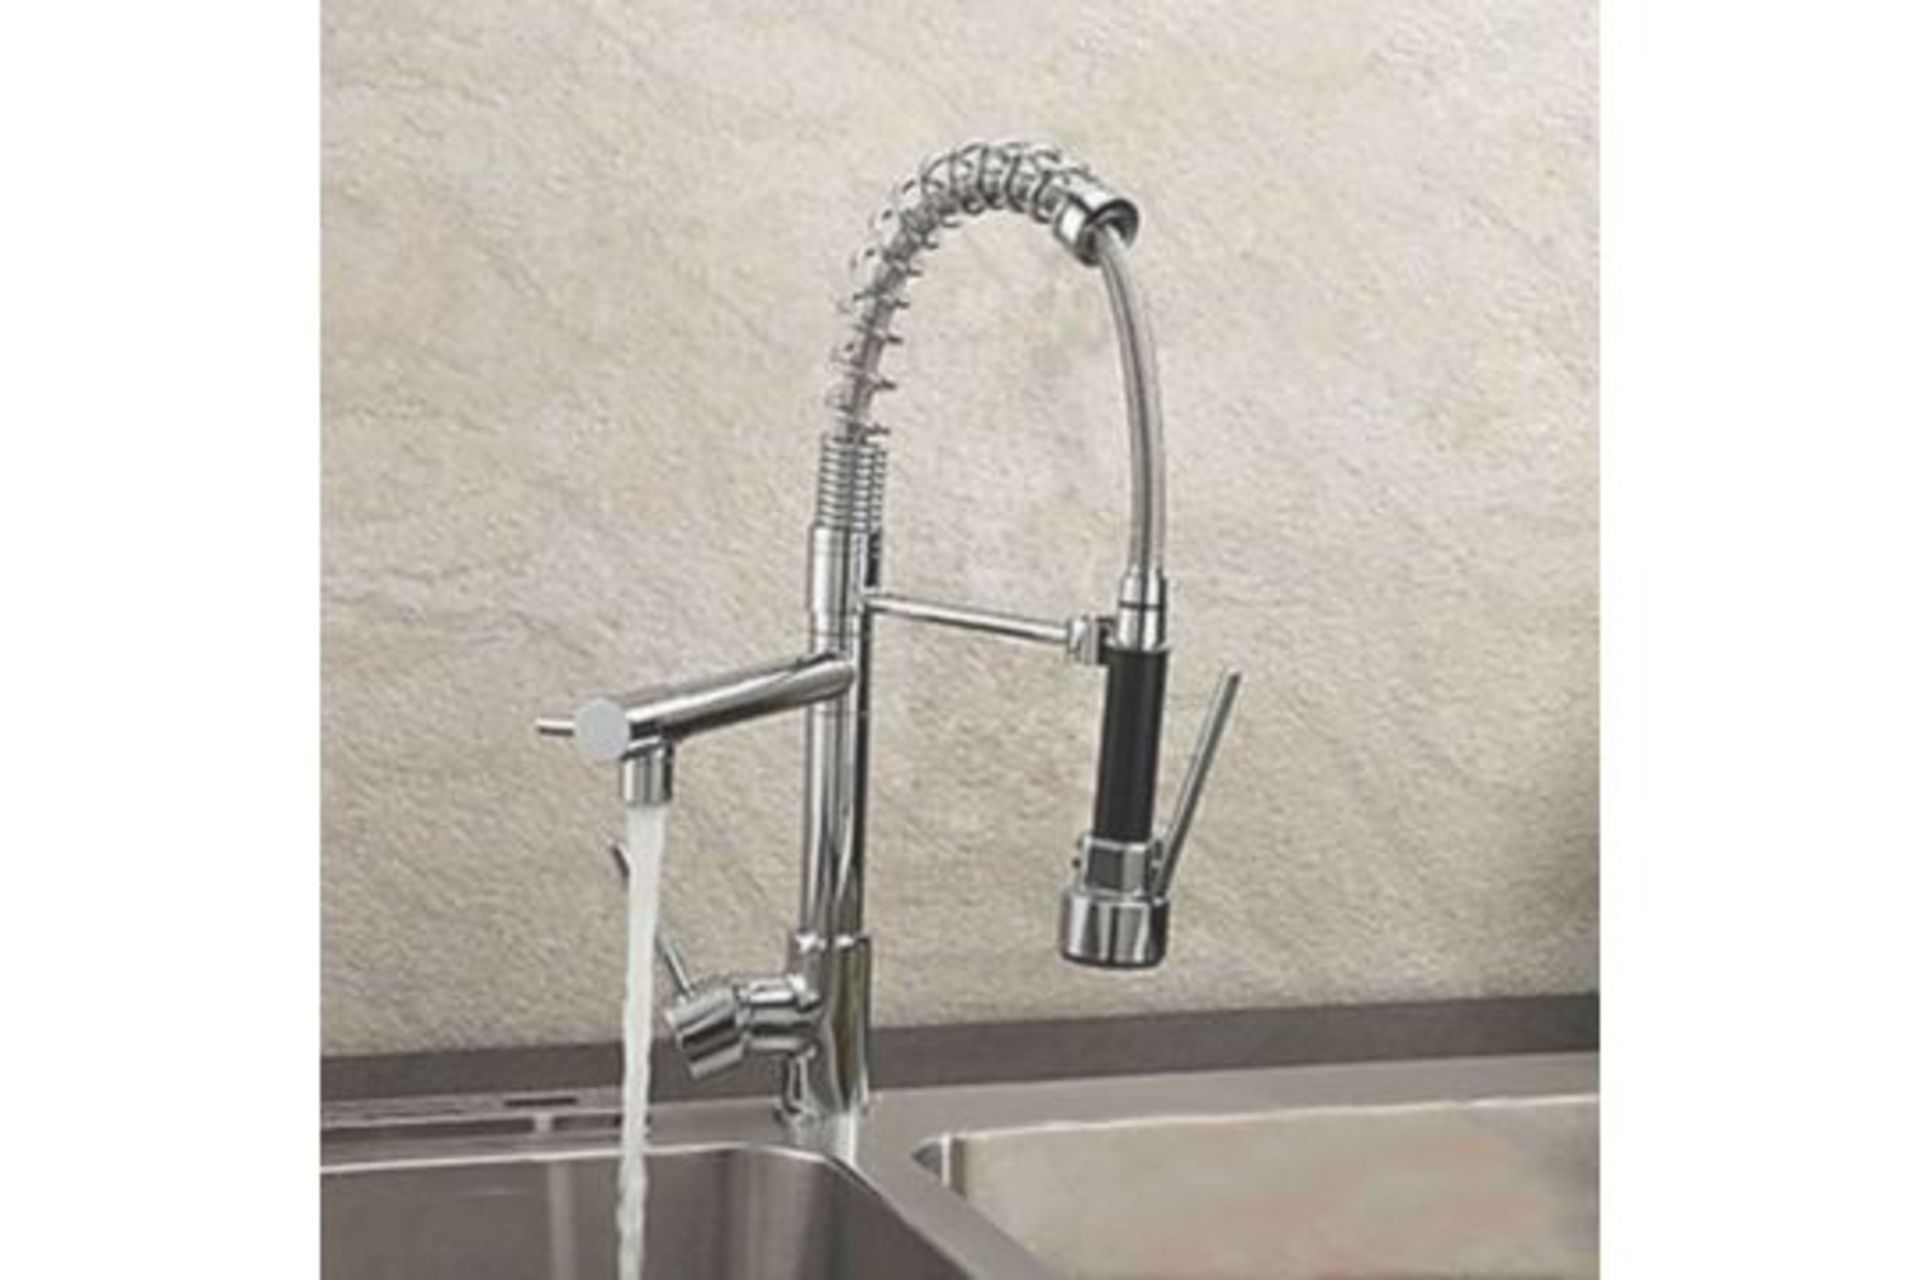 NEW & BOXED Bentley Modern Monobloc Chrome Brass Pull Out Spray Mixer Tap.RRP £349.99.This tap...